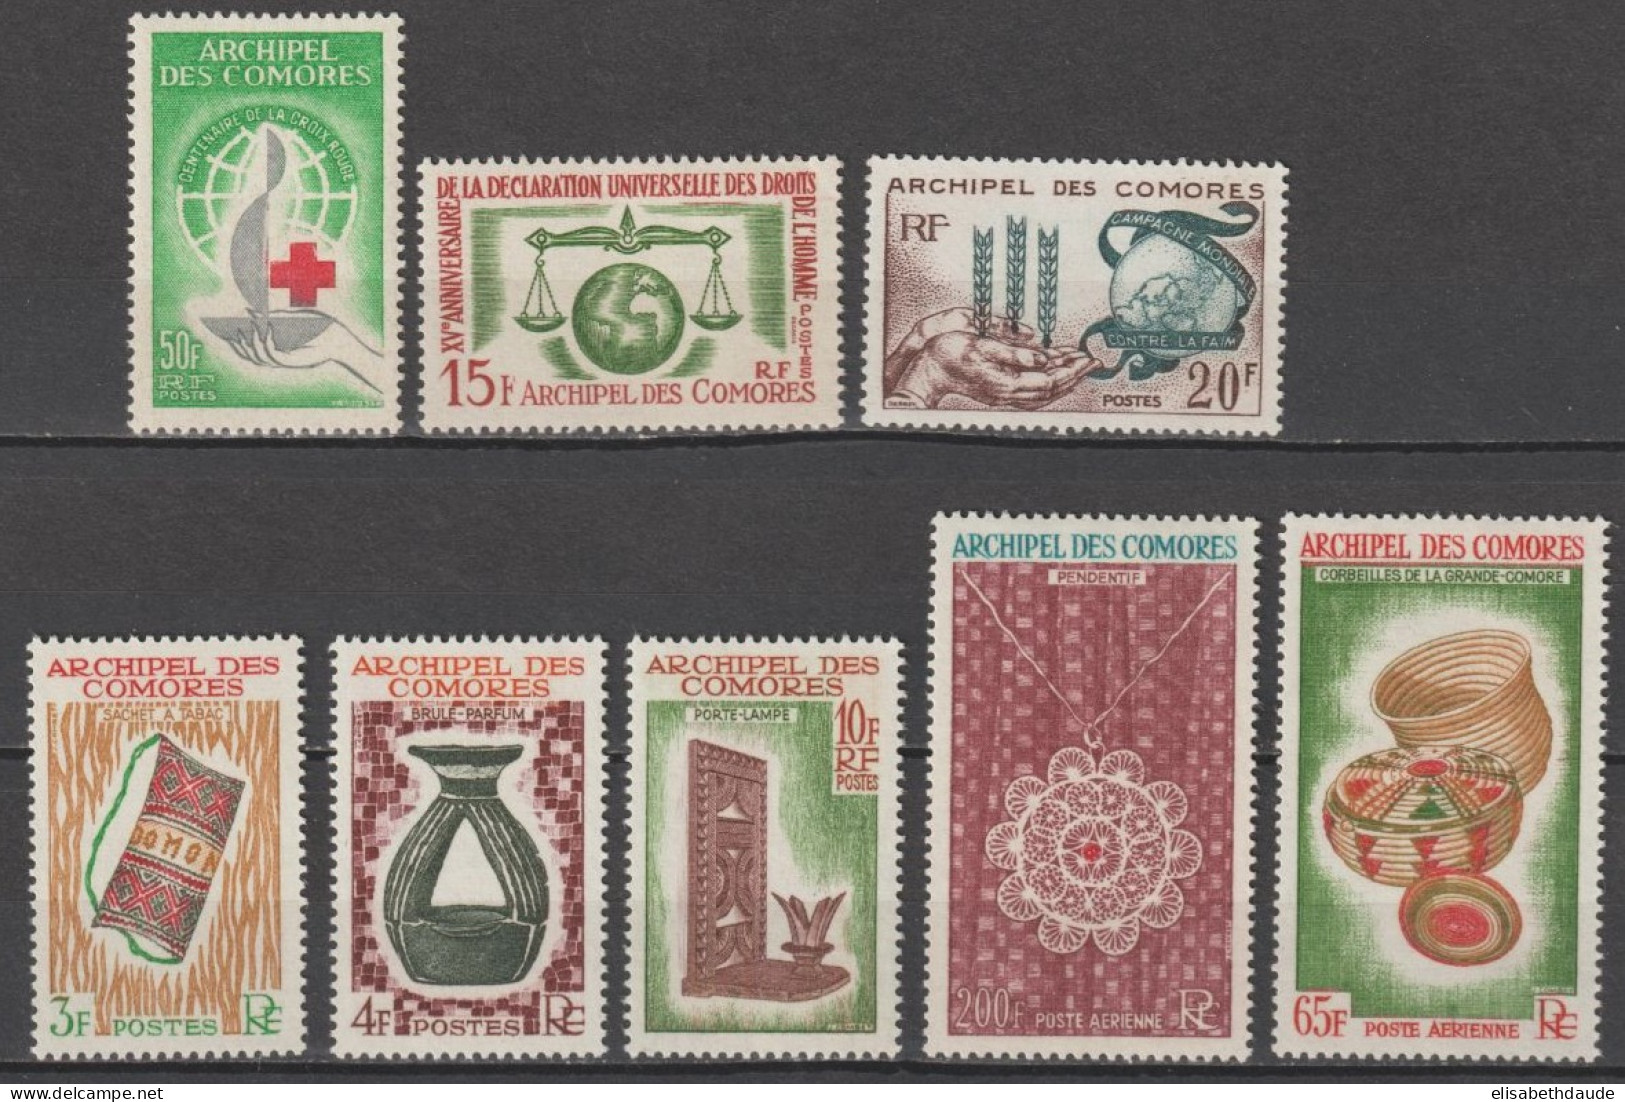 COMORES - 1963 - ANNEE COMPLETE Avec POSTE AERIENNE - YVERT N°26/31 + A8/9 ** MNH - COTE = 50.5 EUR. - Unused Stamps